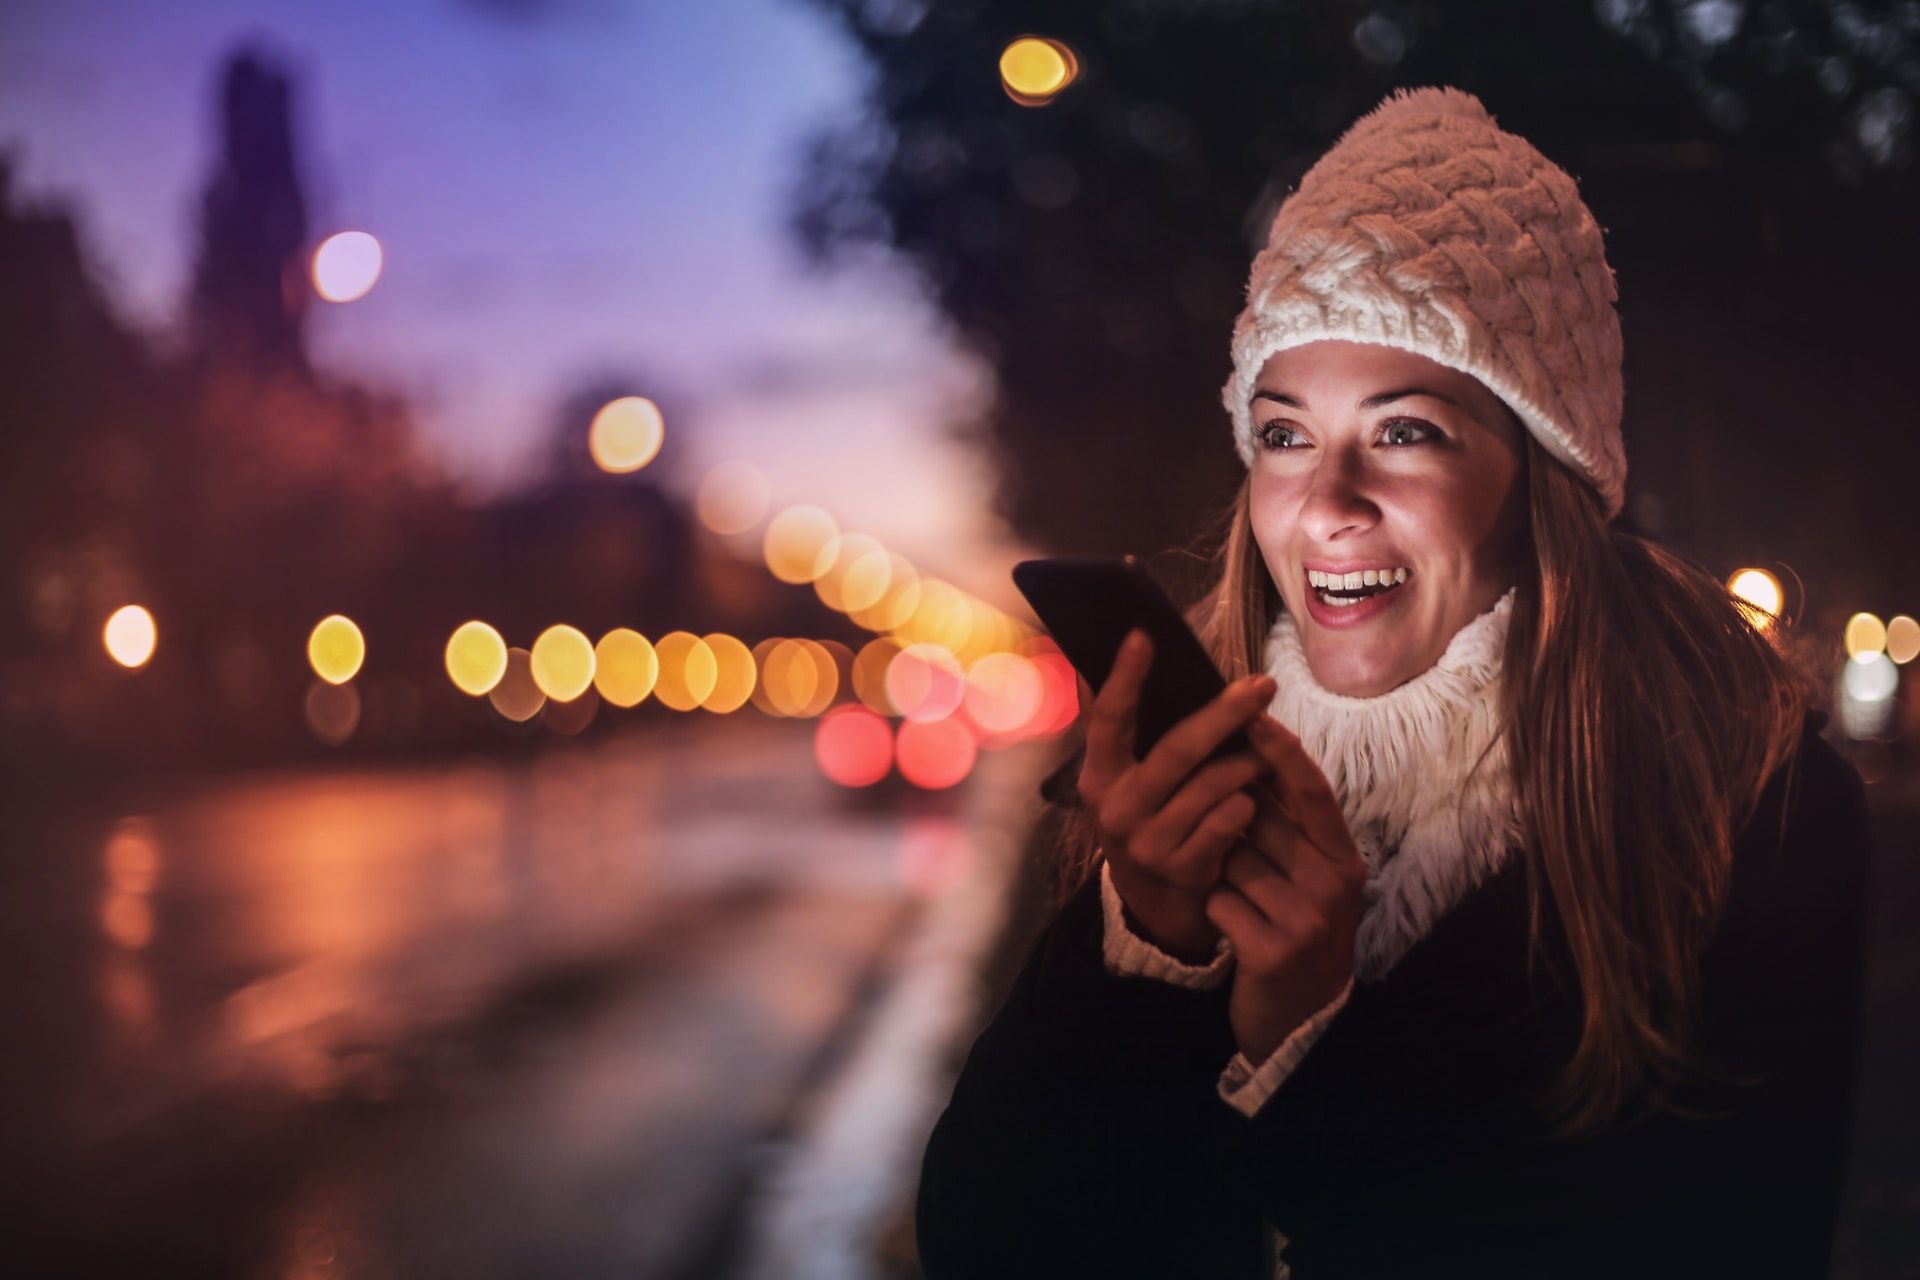 Woman with phone along a street at night